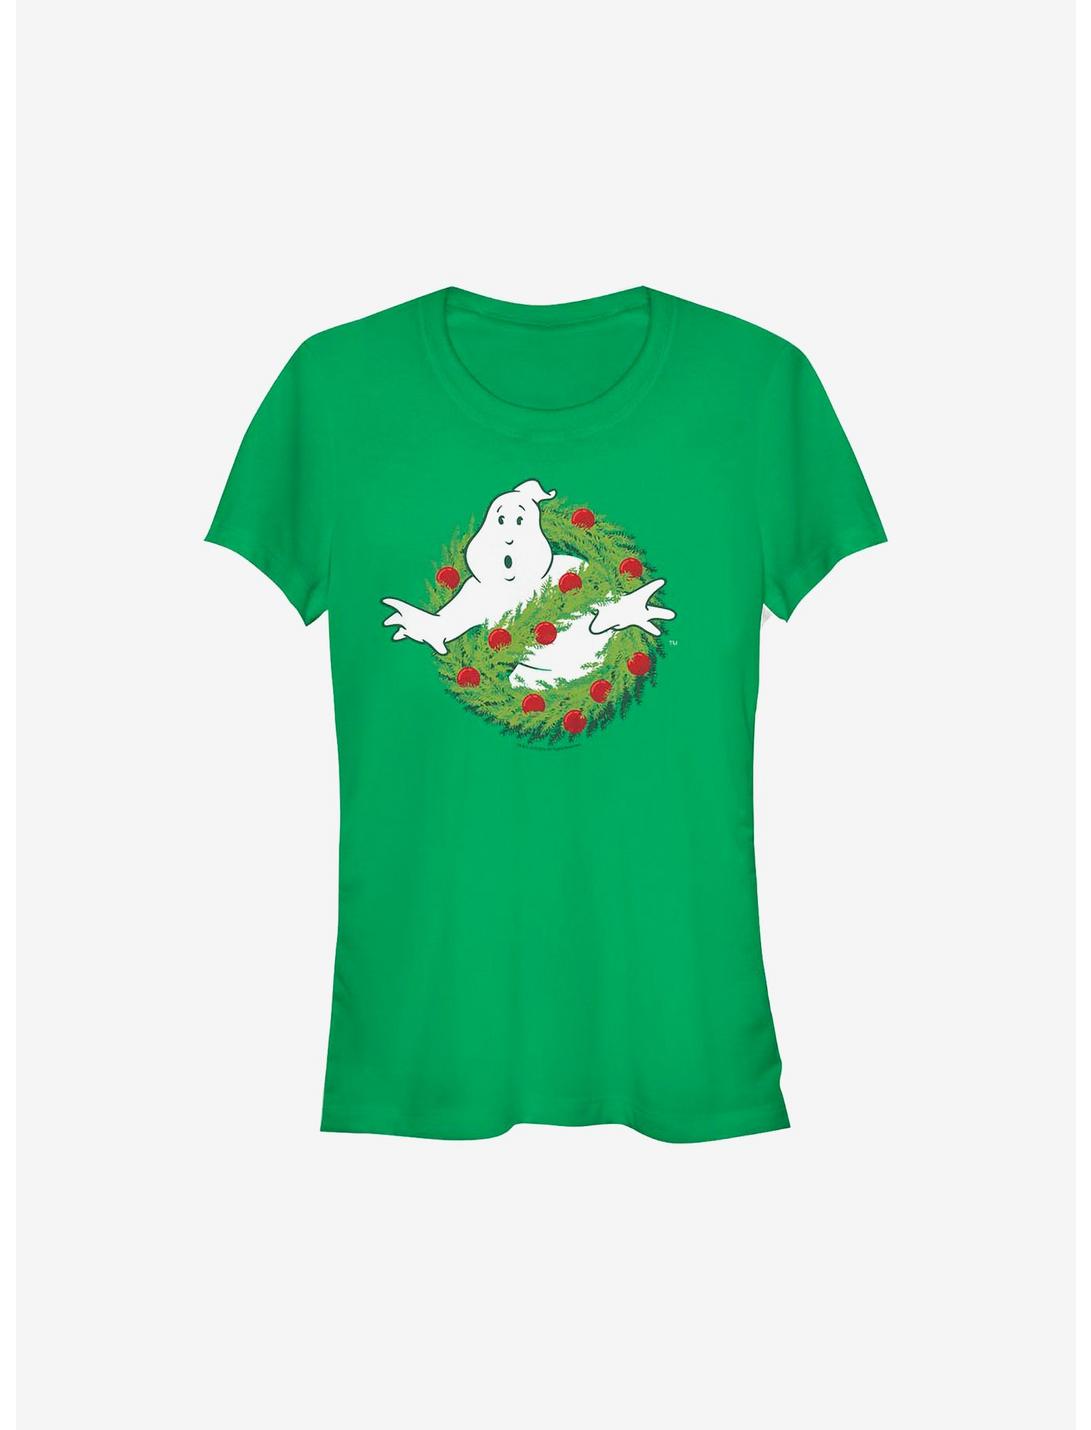 Ghostbusters Holiday Logo Wreath Girls T-Shirt, KELLY, hi-res